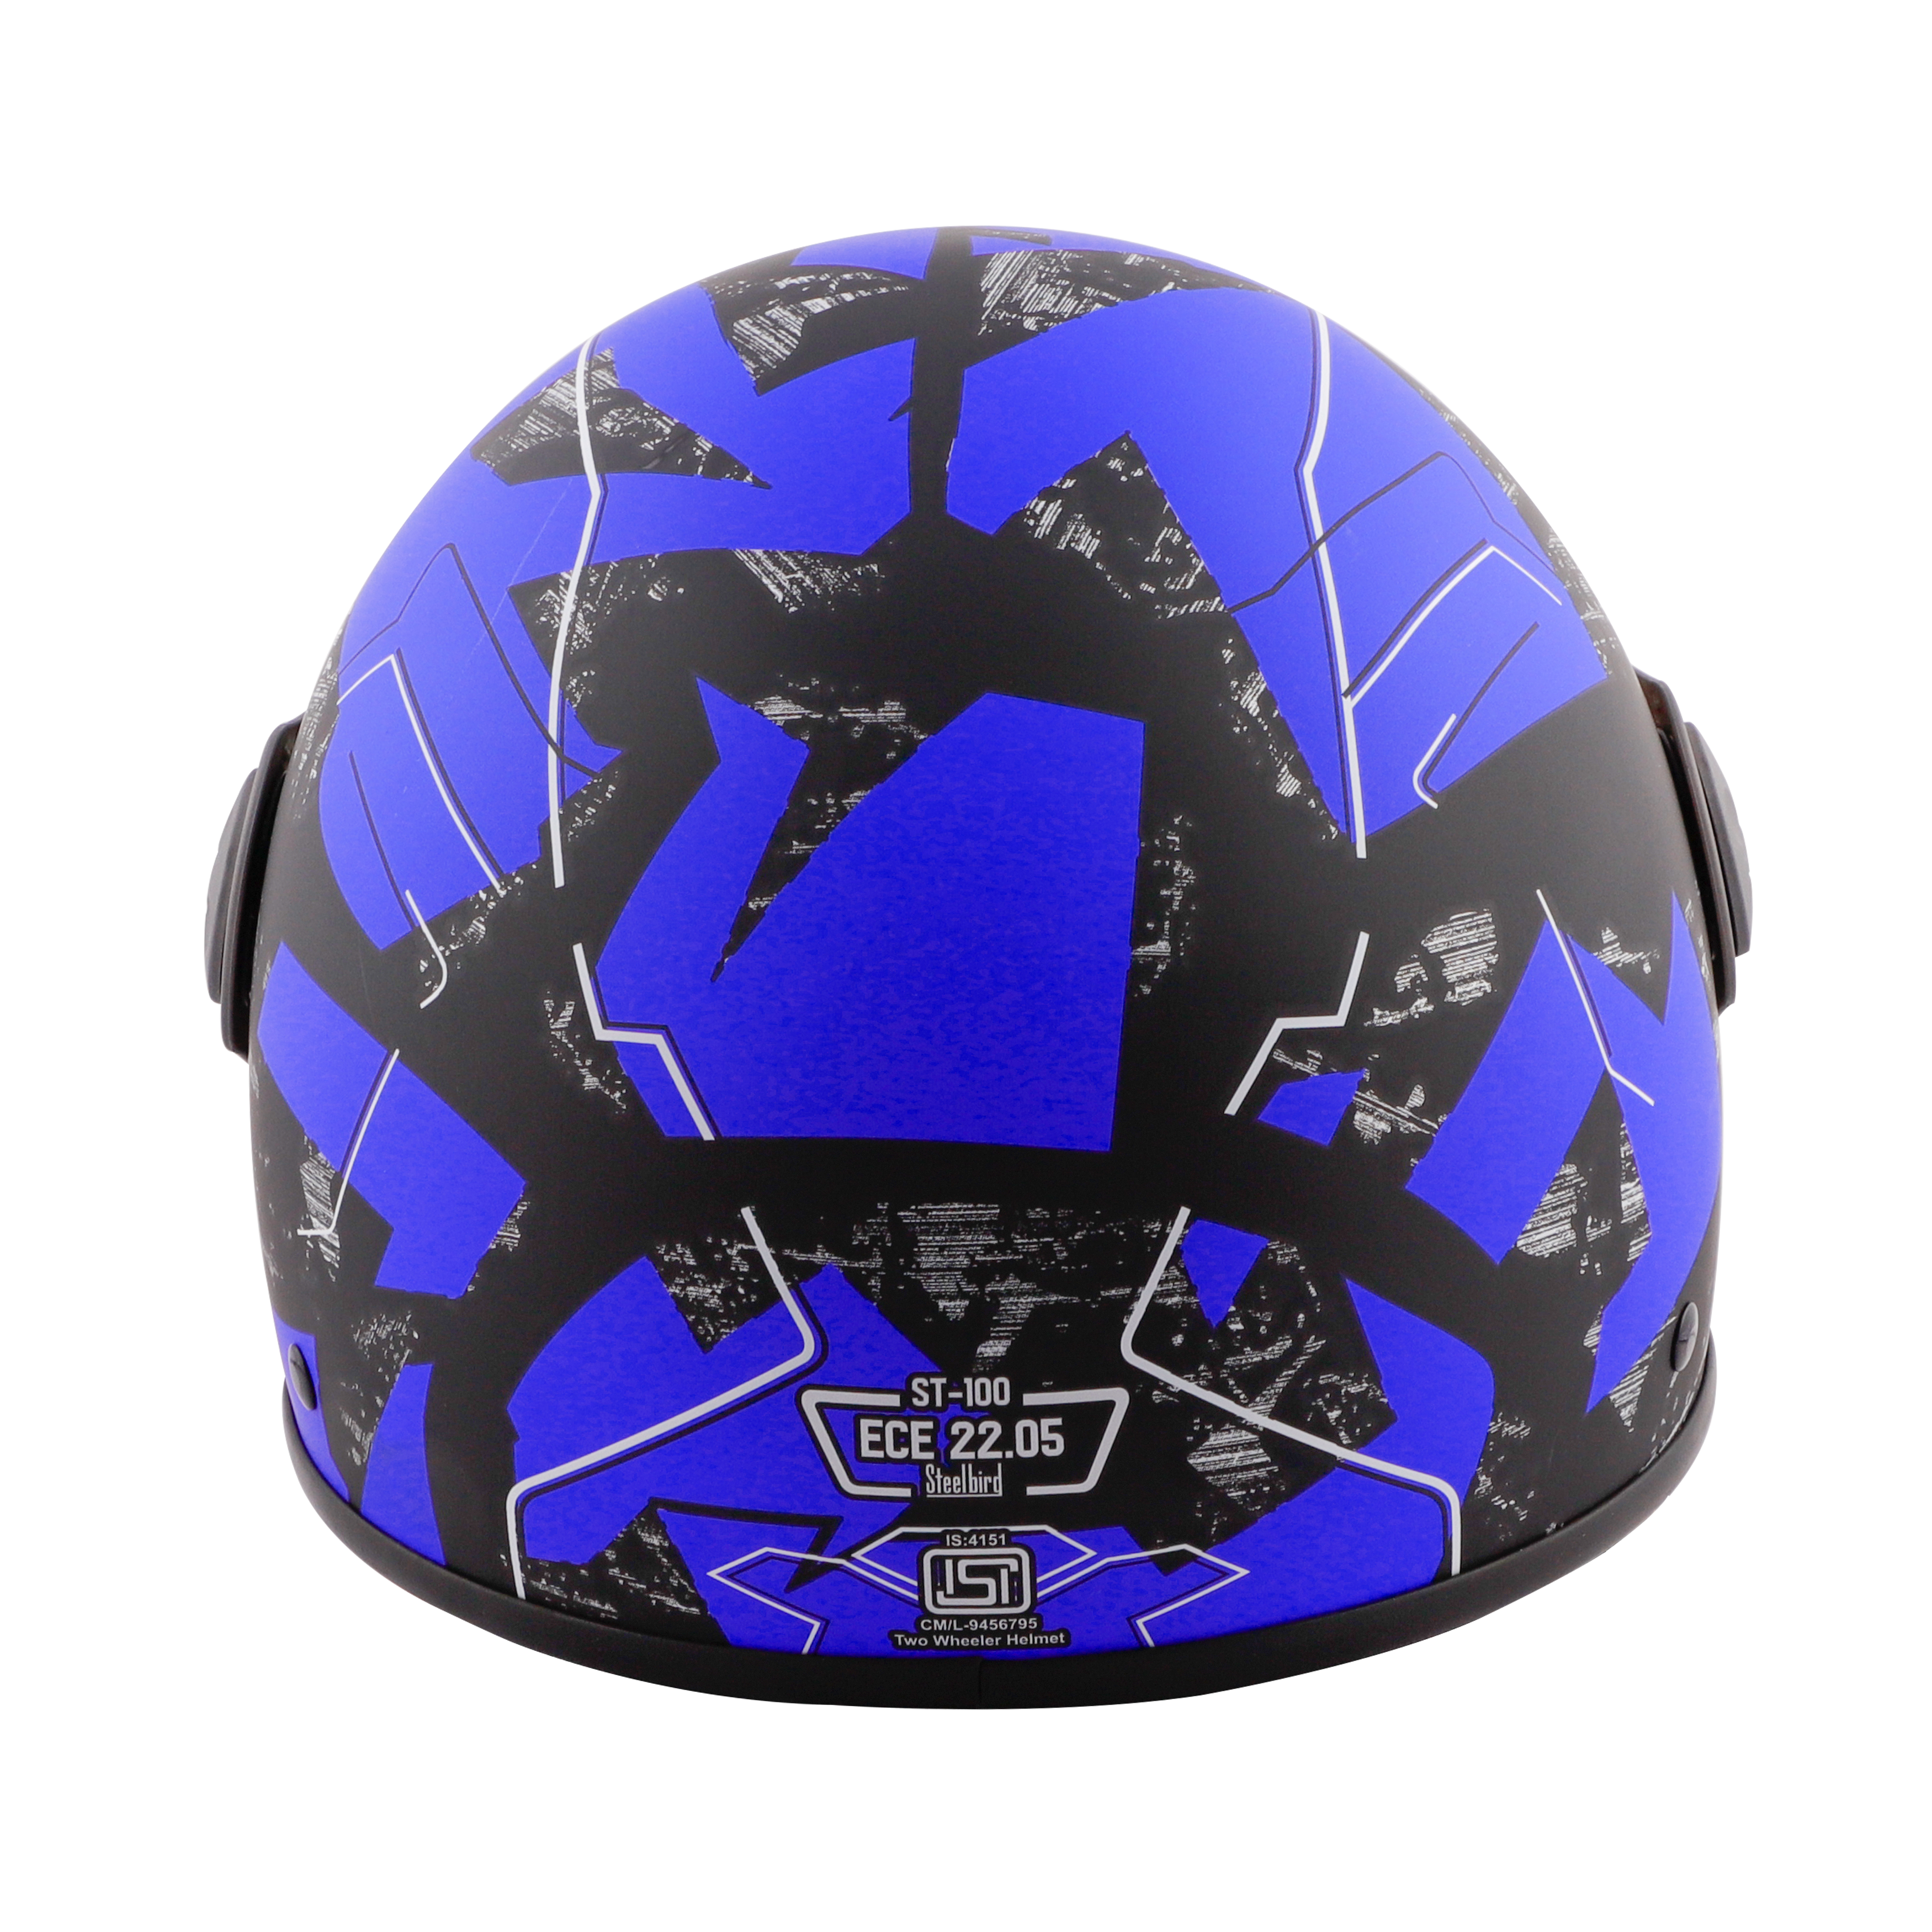 ST-100 CAMO ECE MAT BLACK WITH BLUE (FITTED WITH CLEAR VISOR. SMOKE VISOR ONLY FOR ILLUSTRATION PURPOSE)